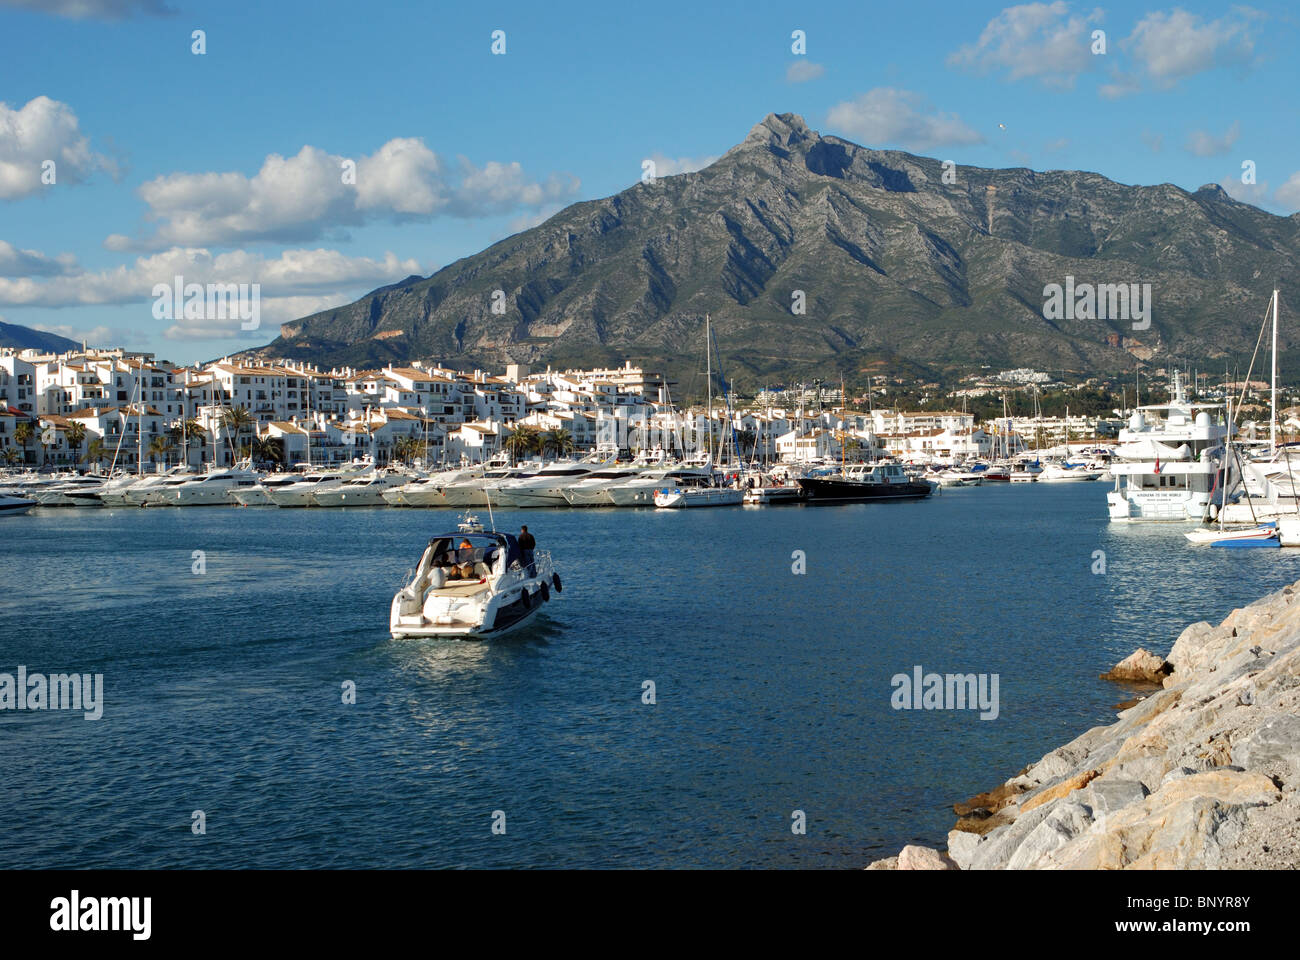 View of the harbour and town, Puerto Banus, Marbella, Costa del Sol, Malaga Province, Andalucia, Spain, Western Europe. Stock Photo